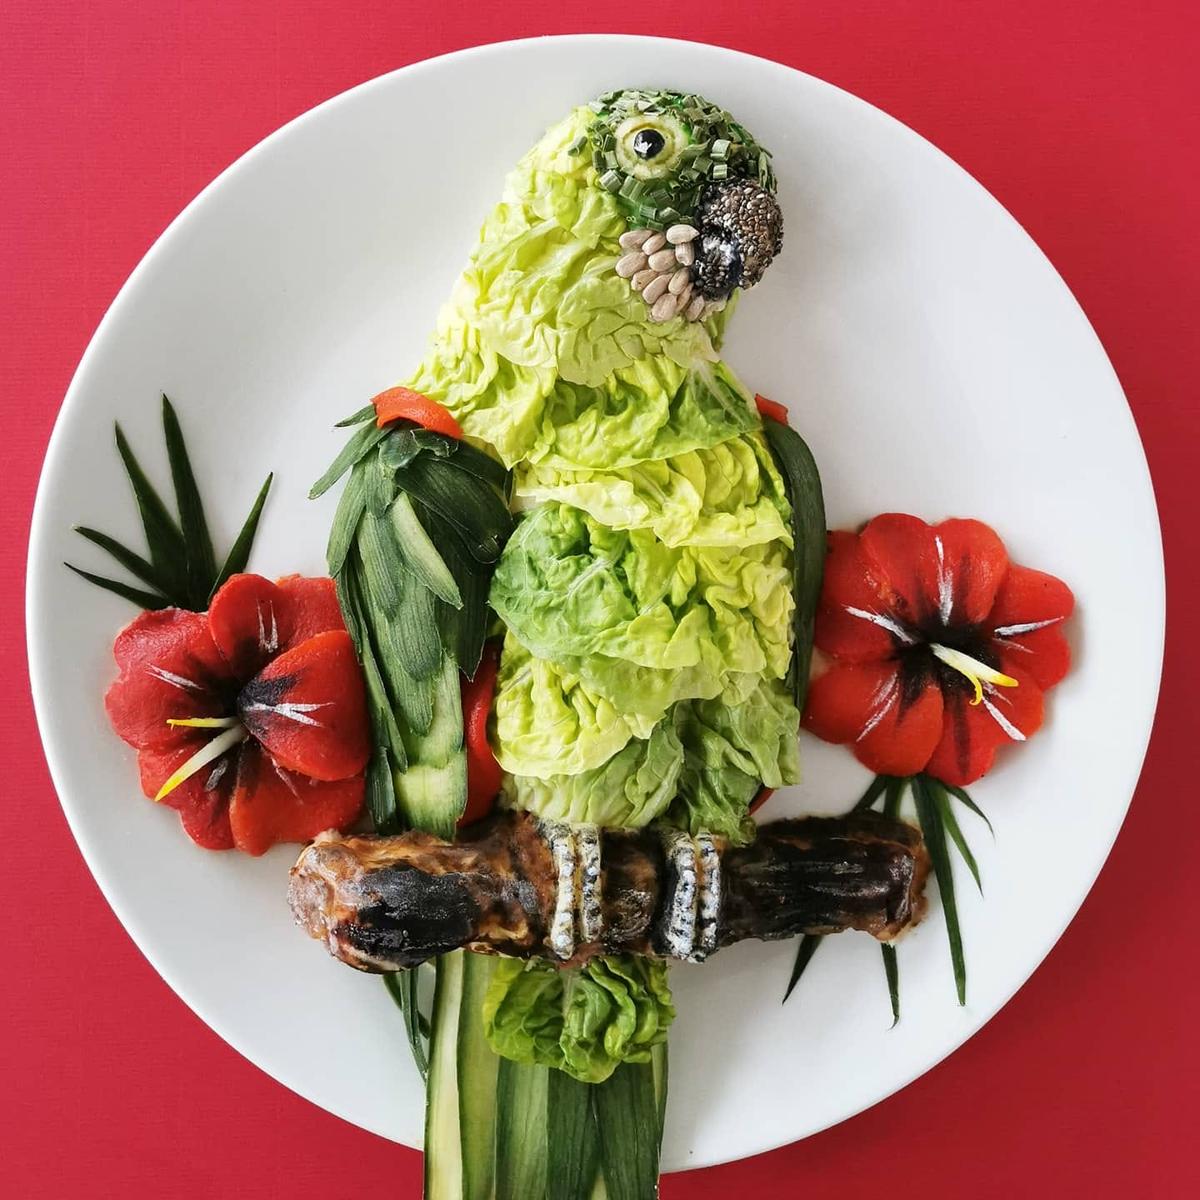 "Green Parrot Salad": A healthy side dish made of salad, peppers, sunflower and sesame seeds, cucumber, and mashed potatoes.  (Courtesy of <a href="https://www.instagram.com/demealprepper/">Jolanda Stokkermans</a>)